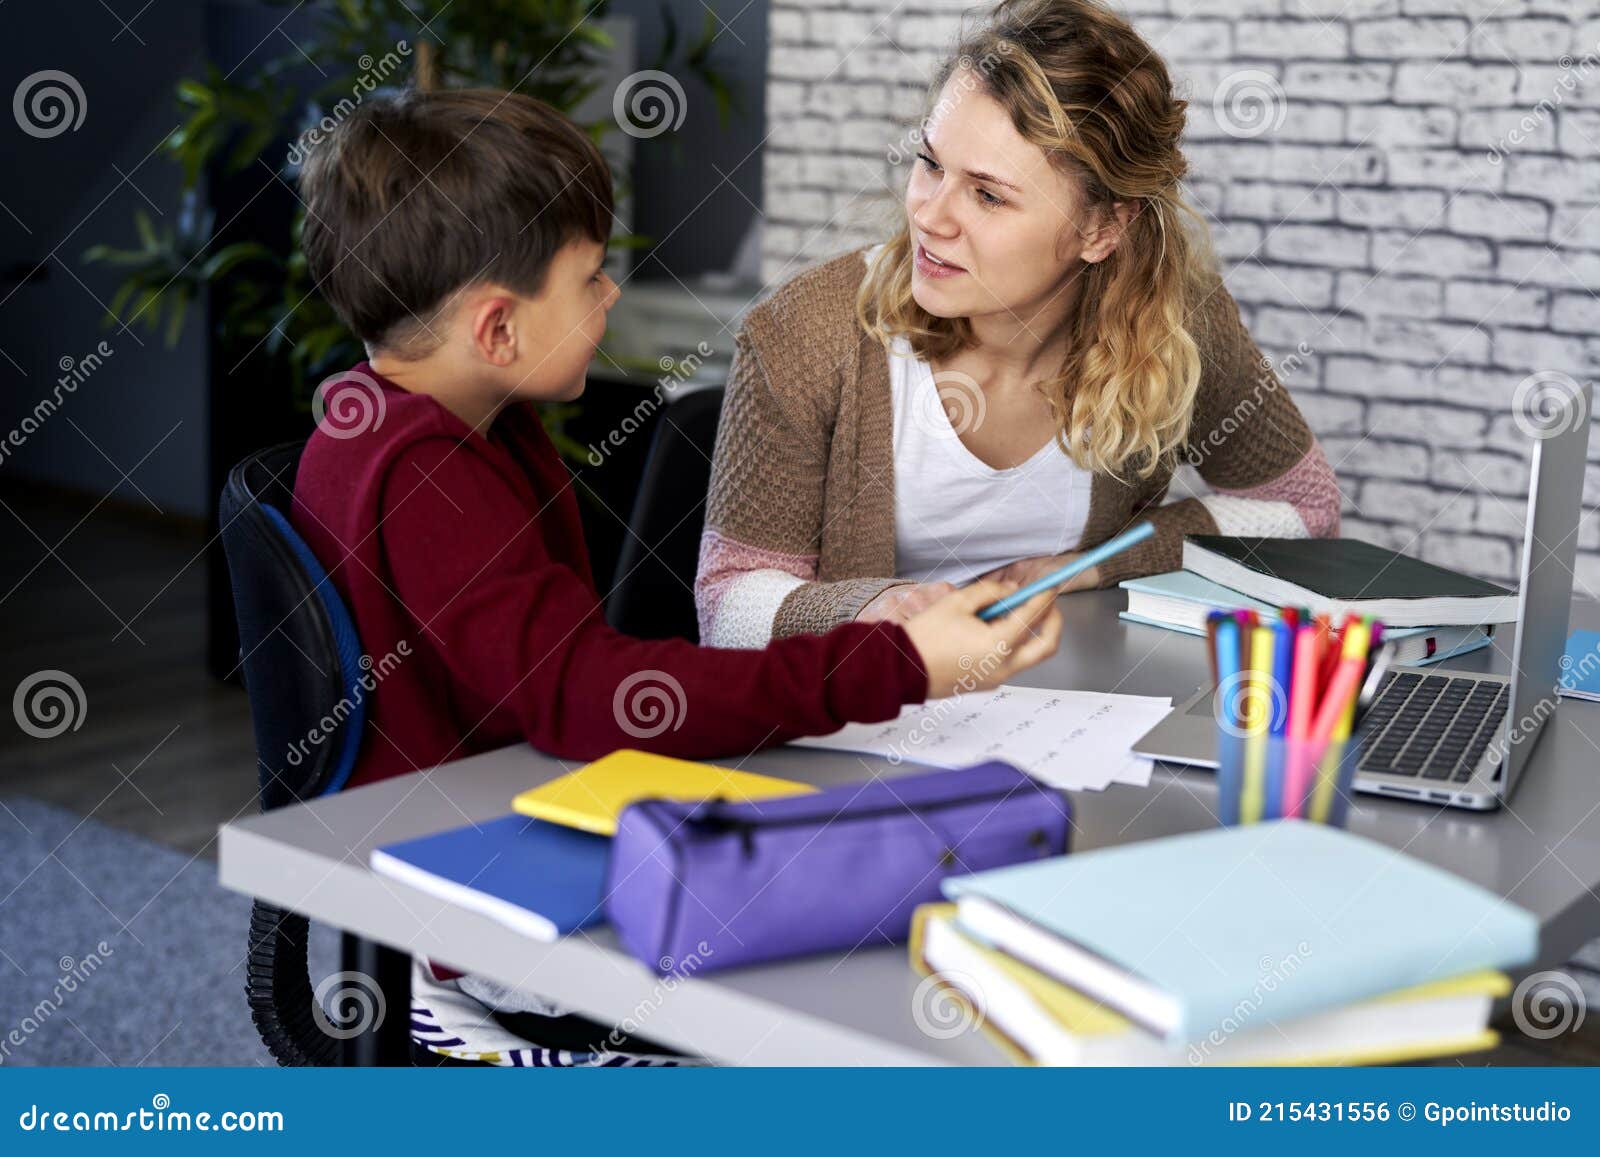 smiling mother explains to her son how to do the homework